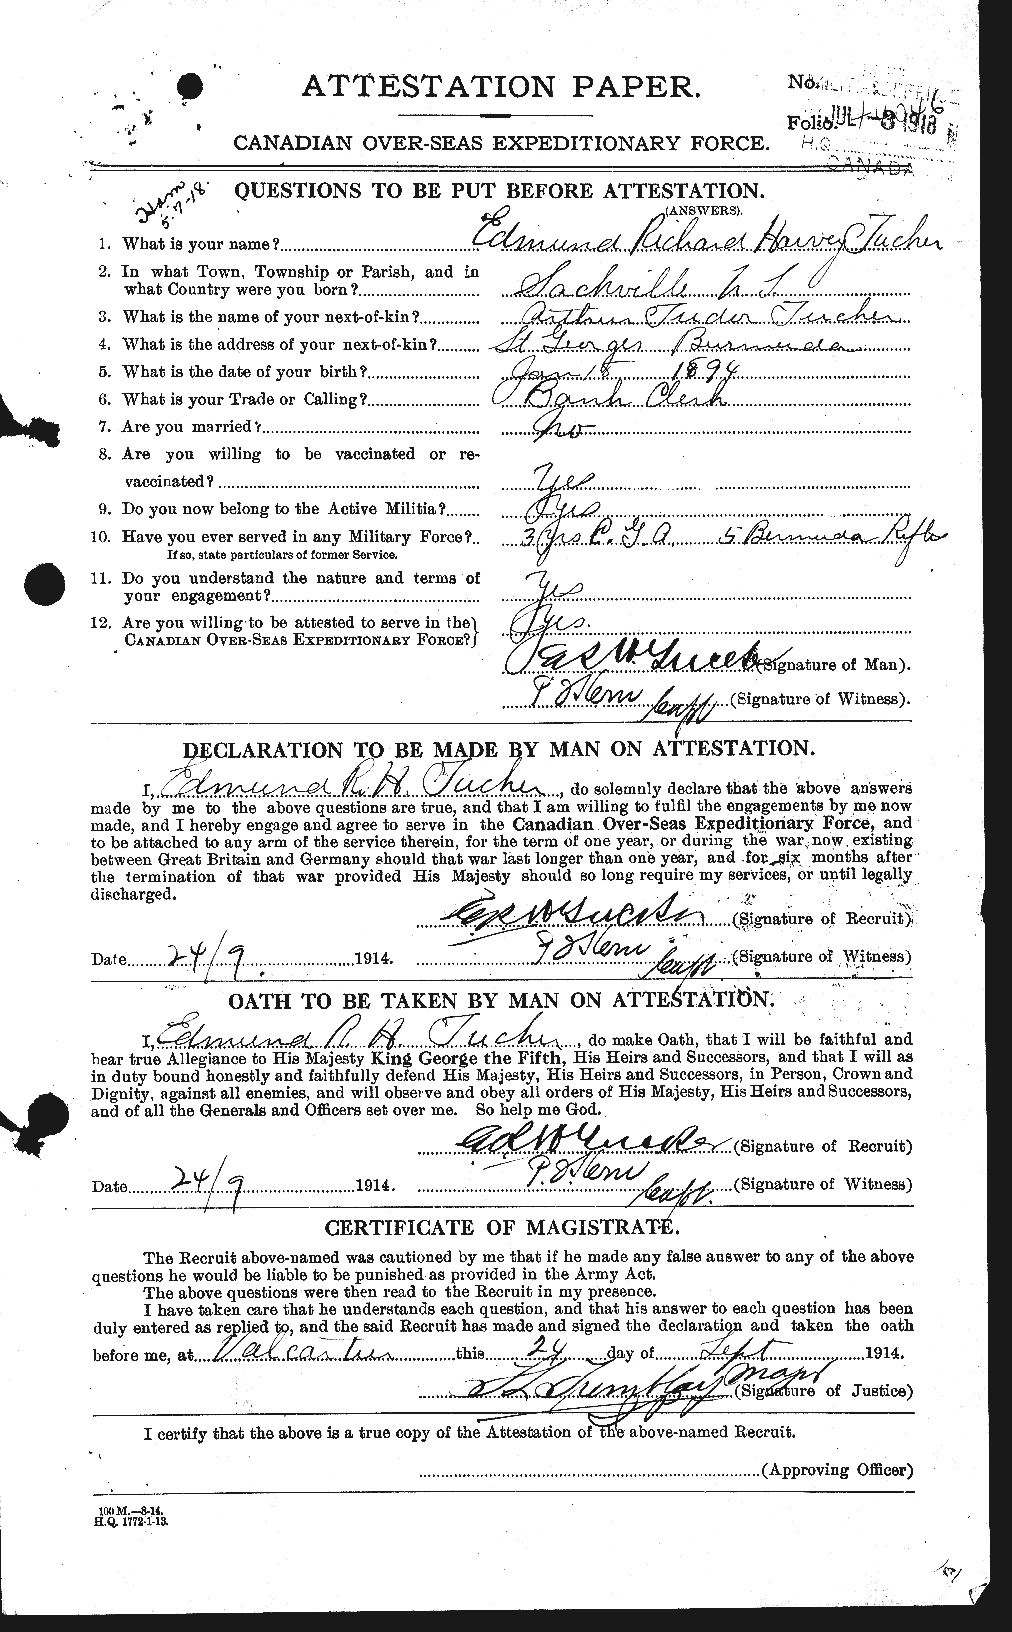 Personnel Records of the First World War - CEF 642675a